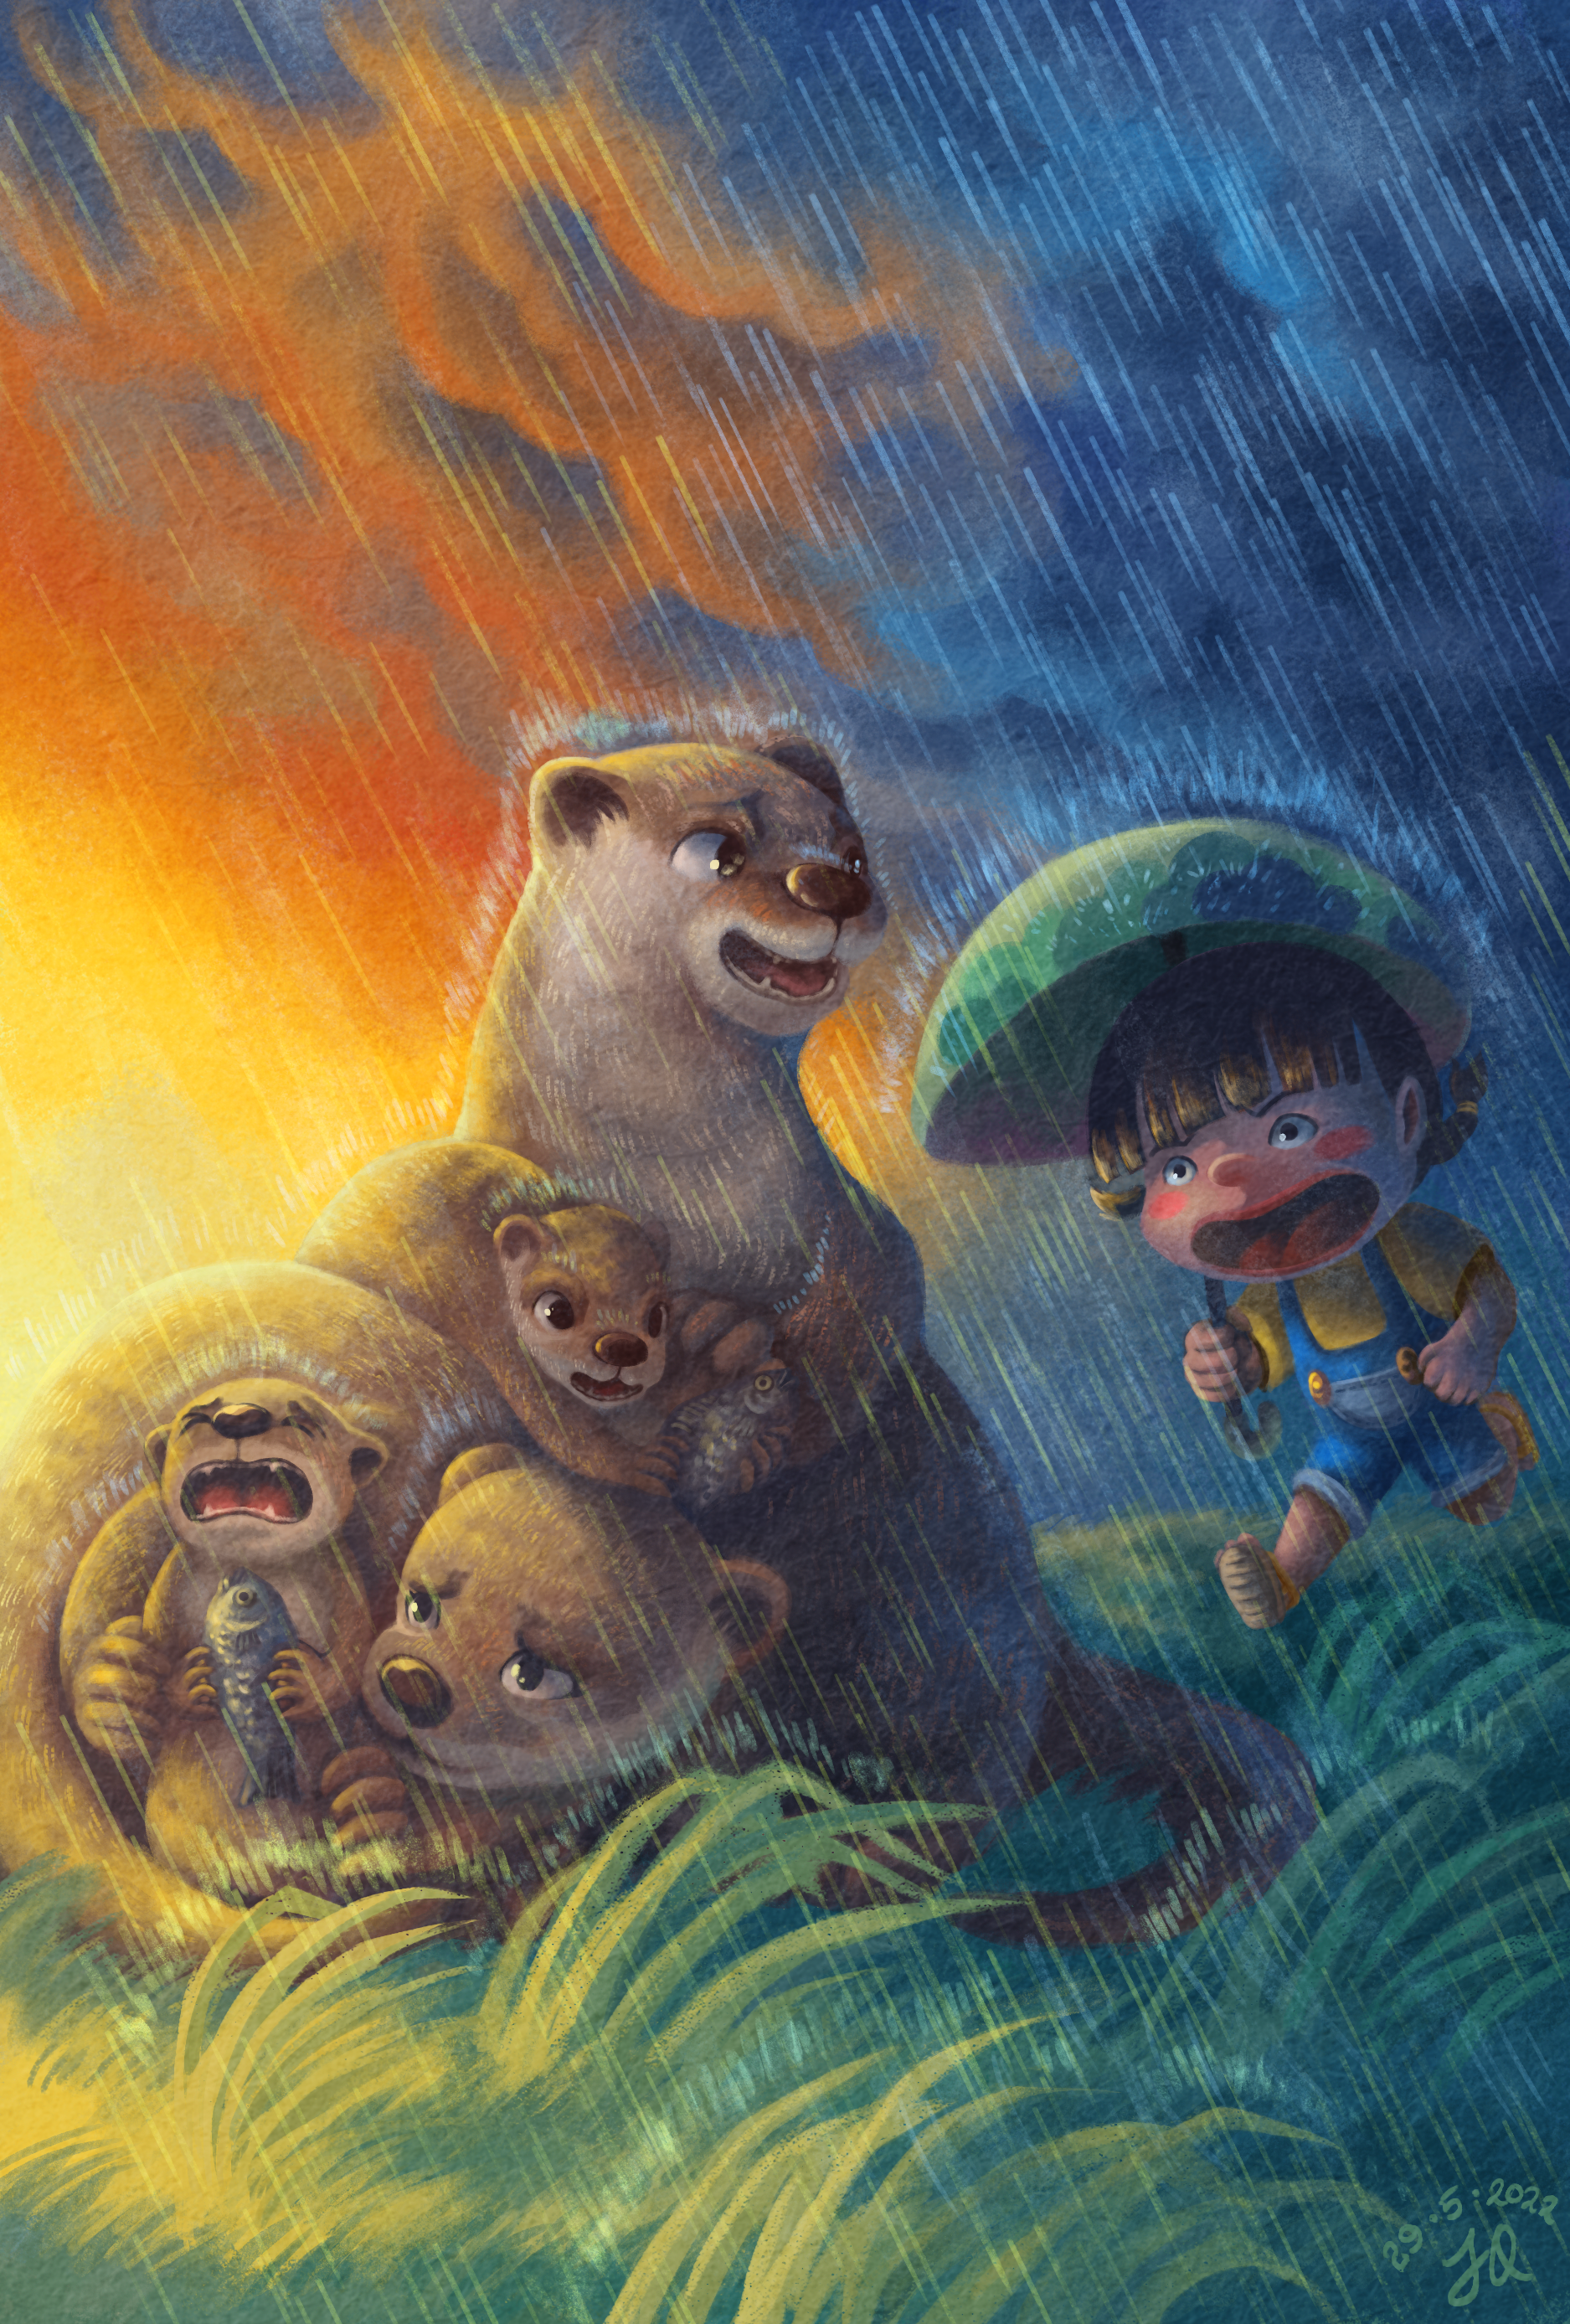 Digital painting of a scene in a storm. Shan Shan, a young girl with short pigtails in a blue denim jumpshoot and yellow shirt, is sprinting towards Mr. Otter and his family from the distance, on the right of the painting. She is carrying a green umbrella overhead as she sprints, mouth wide open and calling out to them. Mr. Otter is looking in her direction, surprised and touched. His partner is curled up next to him trying to comfort their young son, who has a fish in his two paws and is bawling, frightened by the sudden rain. Their daughted is snuggled between them both and playing with a fish in her paws, oblivious to the storm.